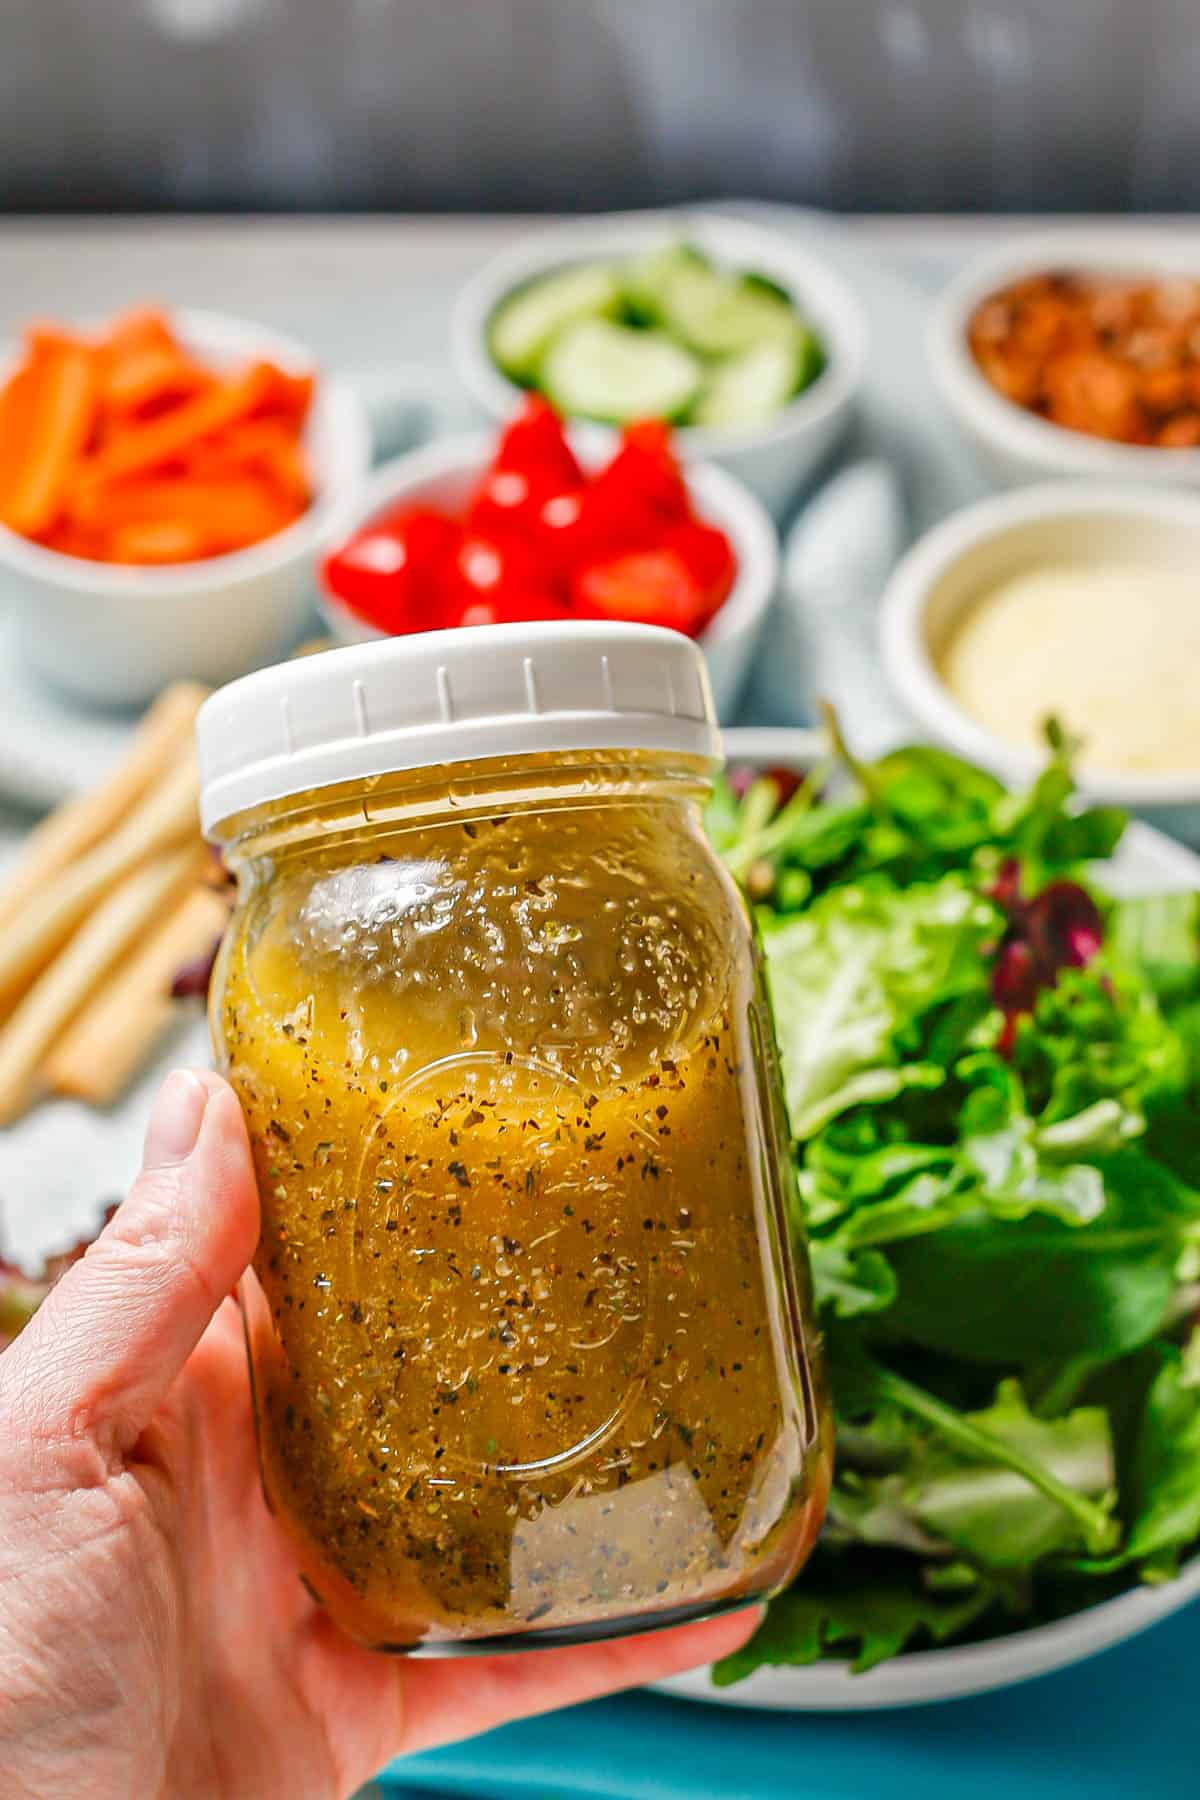 A hand holding a jar of homemade salad dressing that's been shaken up with a salad spread in the background.